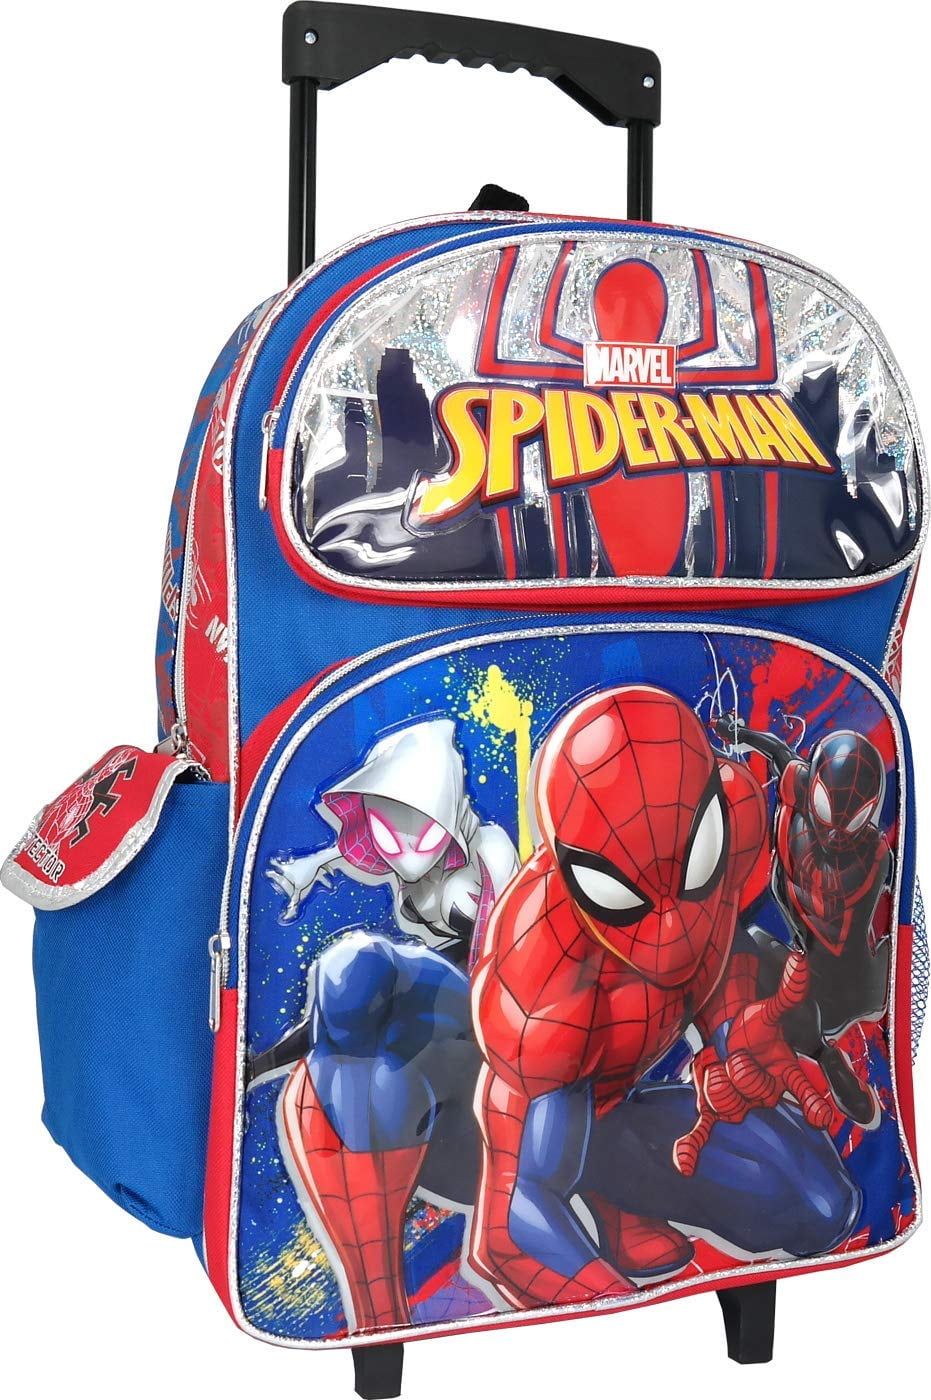 Man of Steel 16" inches Large Rolling Backpack BRAND NEW Licensed Superman 